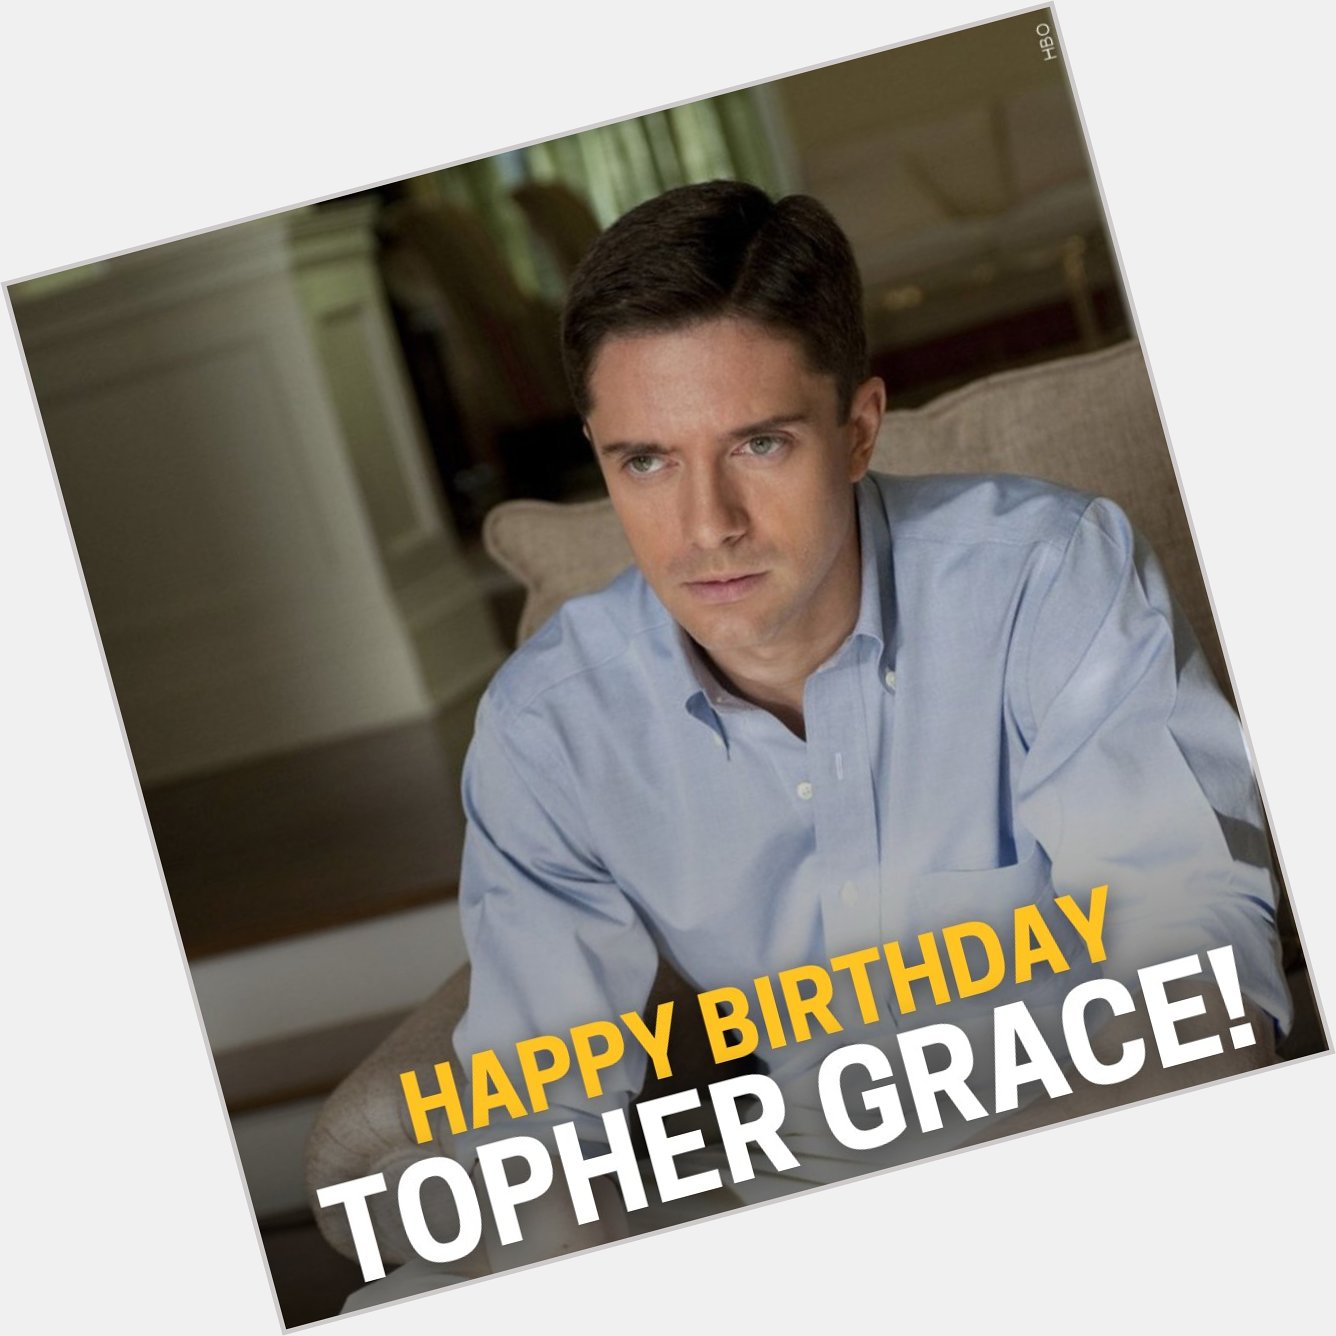  Happy birthday Topher Grace! He\s turning 4  5  today! 